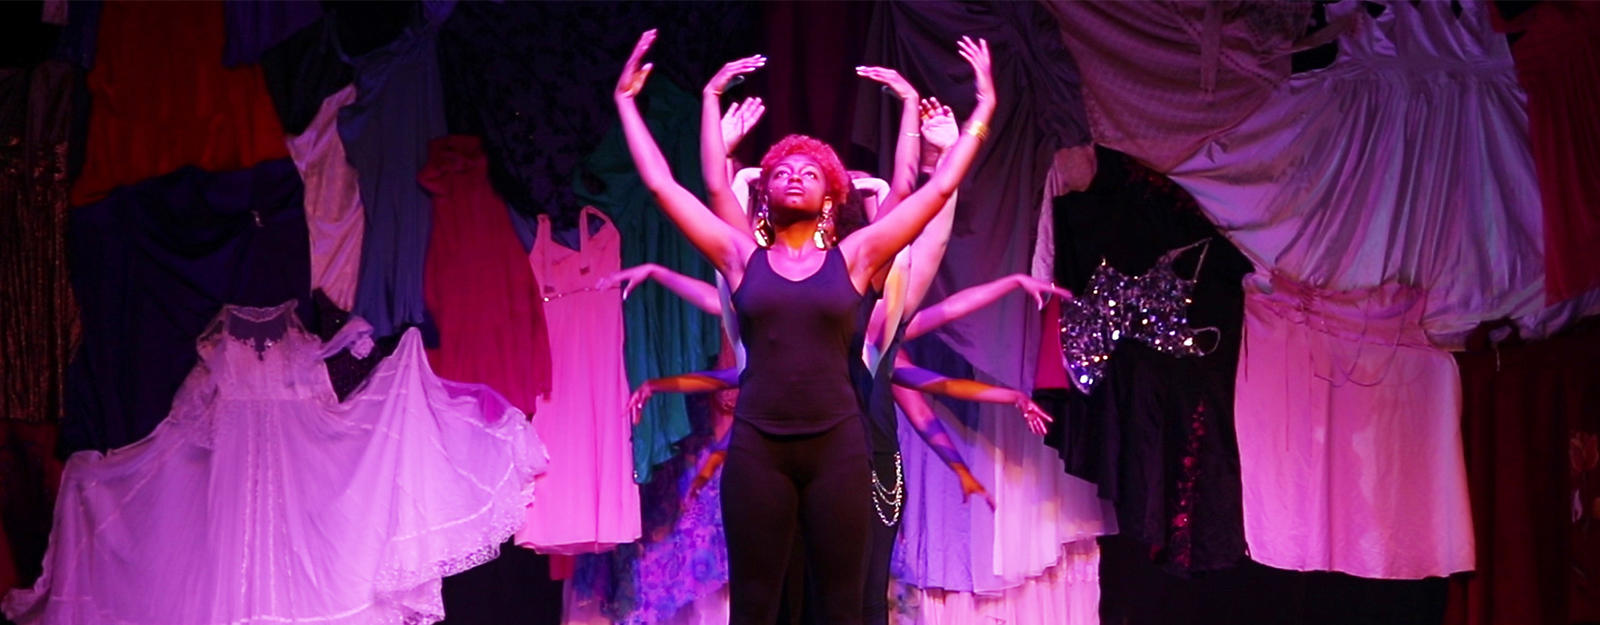 Student performing a dance number during a play.